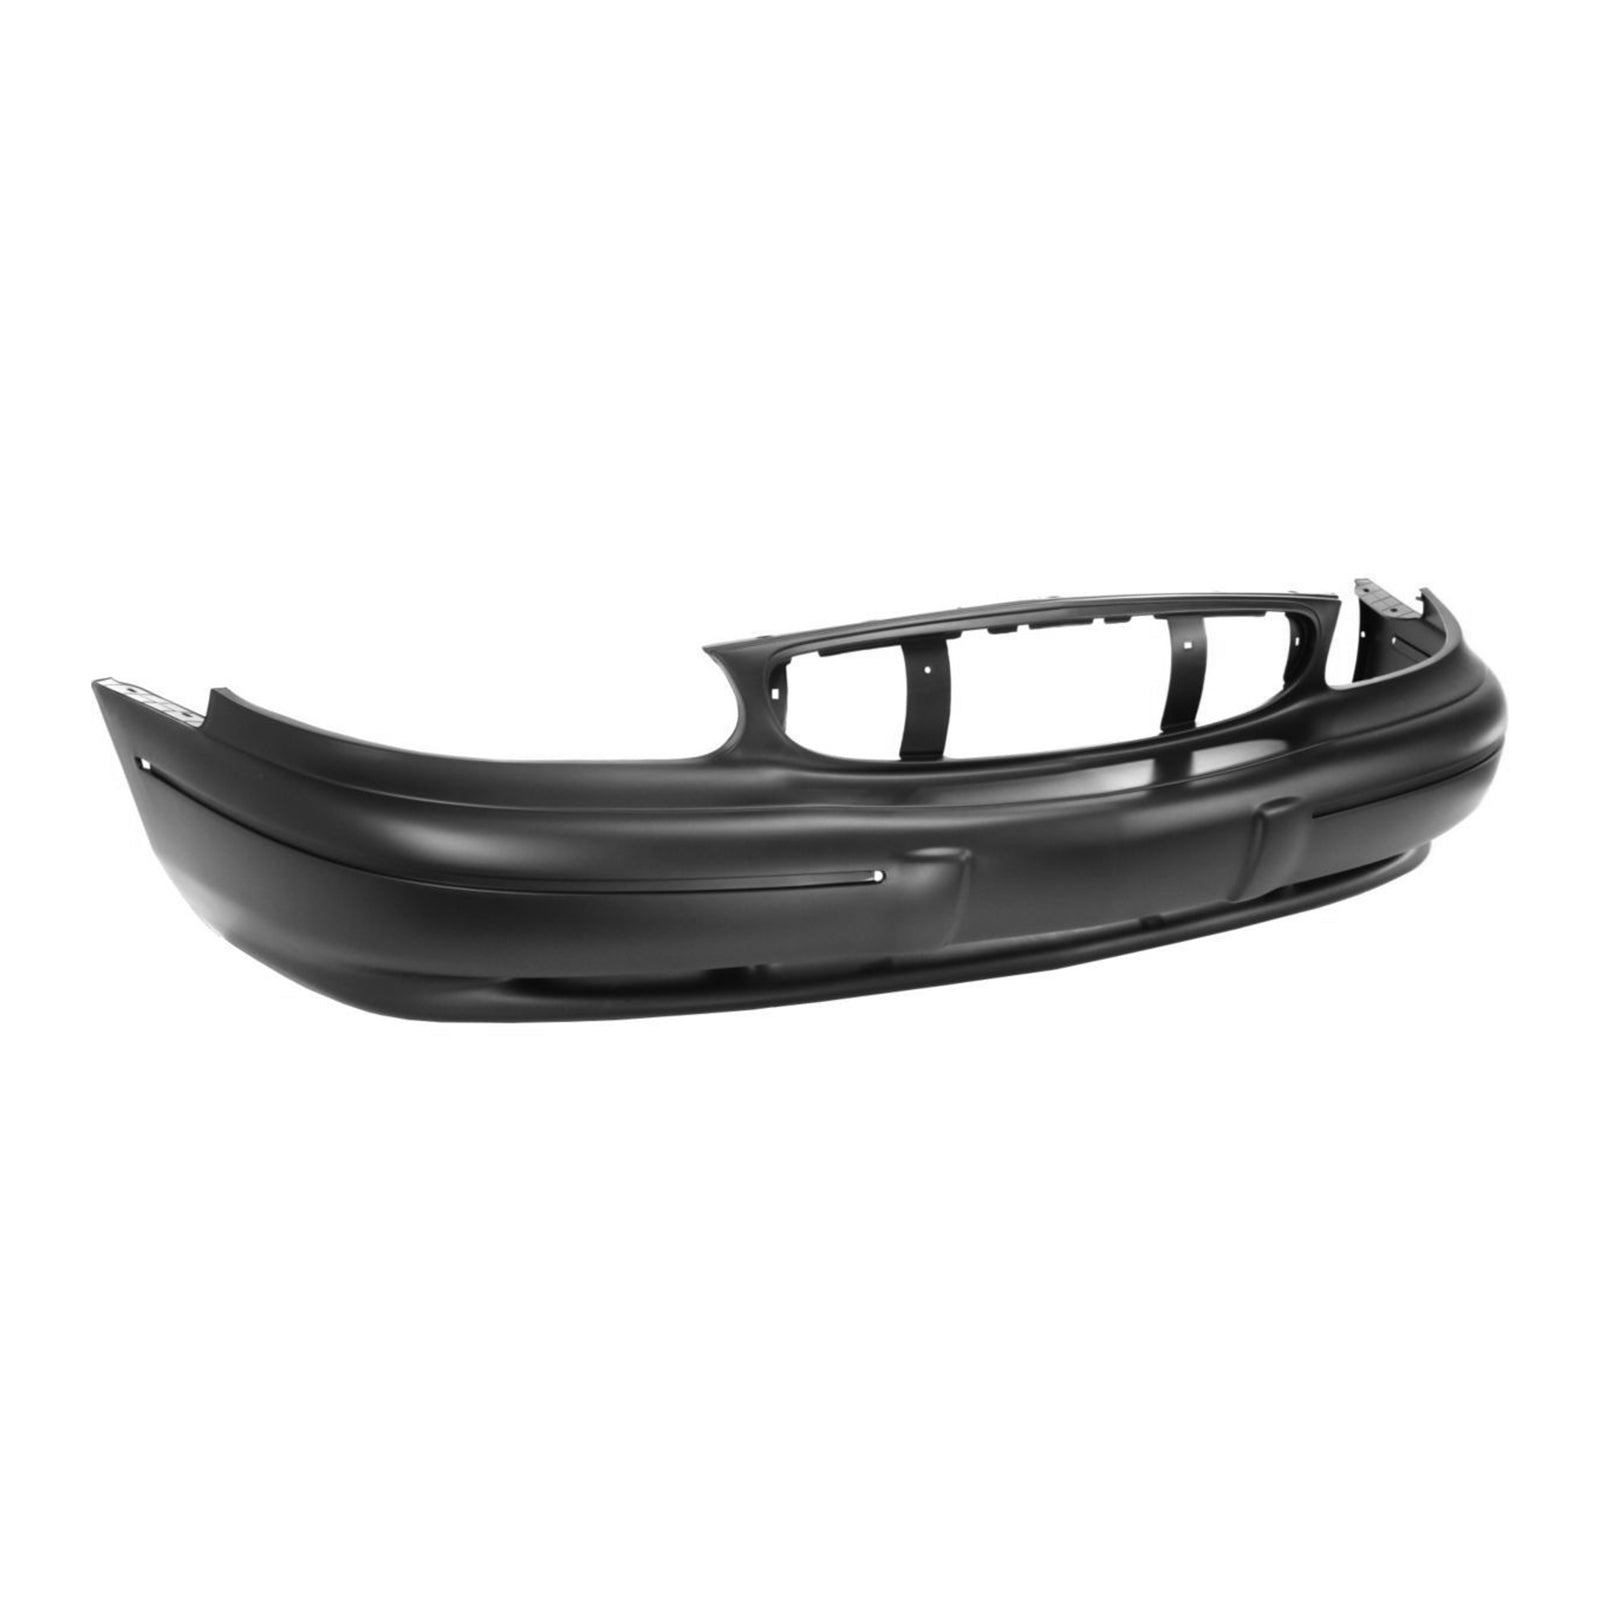 Buick Century 1997 - 2003 Front Bumper Cover 97 - 03 GM1000543 Bumper-King